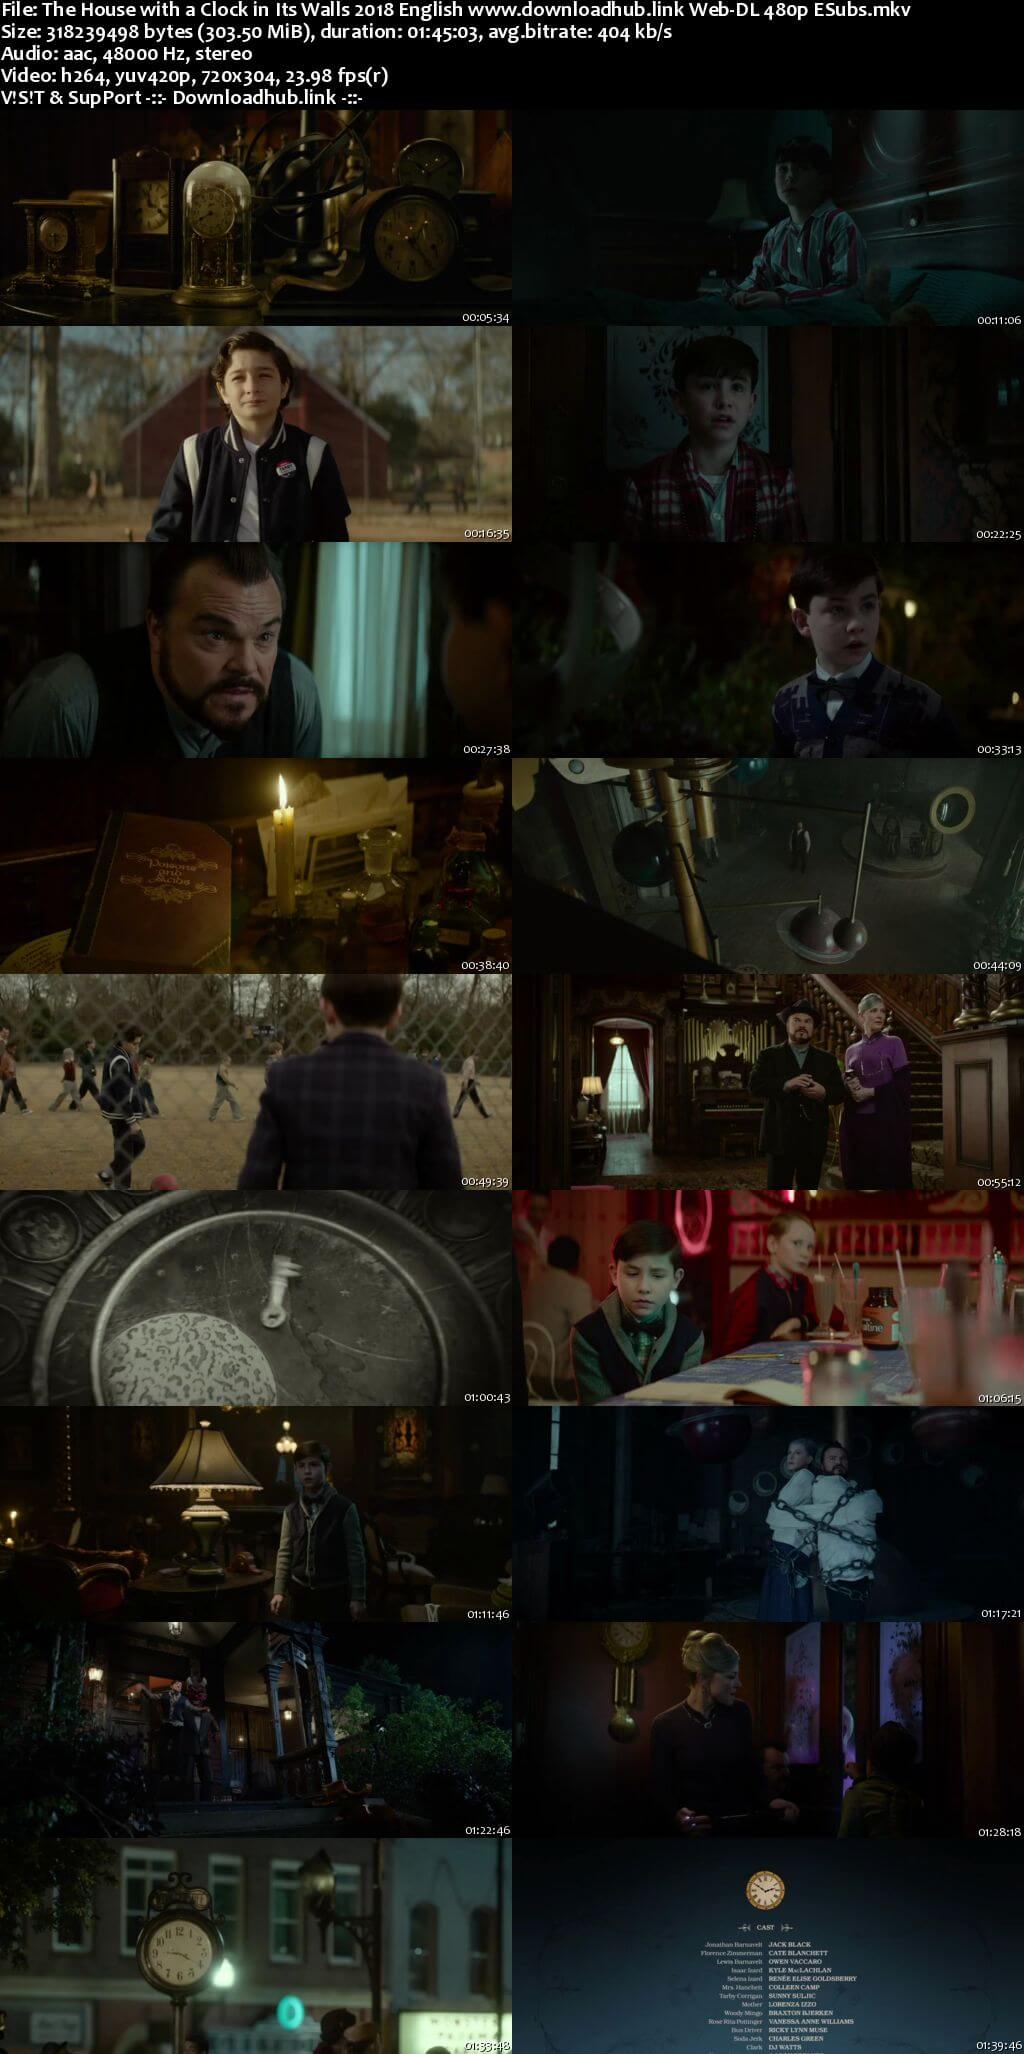 The House with a Clock in Its Walls 2018 English 300MB Web-DL 480p ESubs